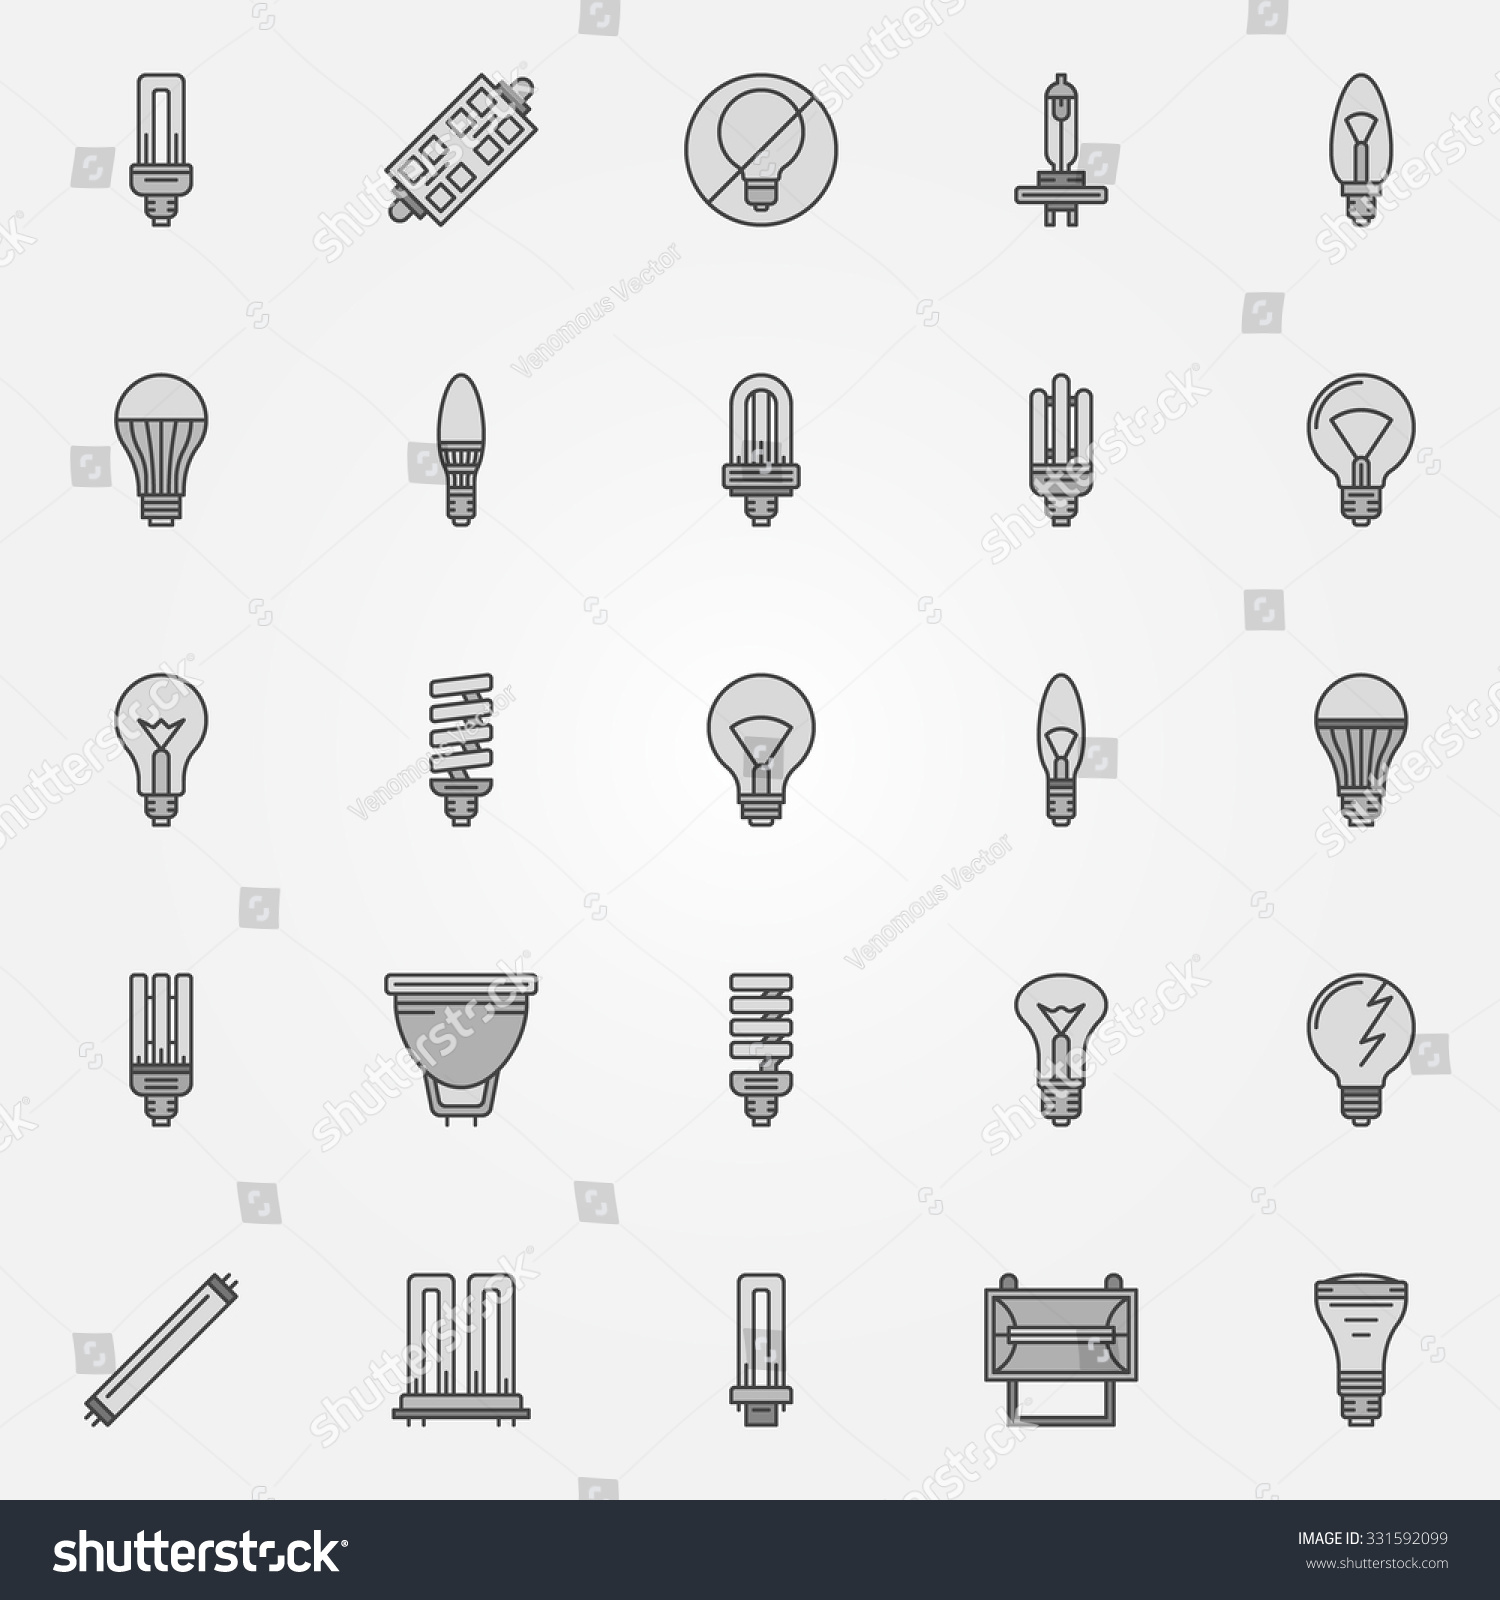 Monochrome Bulb Icons - Vector Collection Of Flat Dark Halogen, Led ...